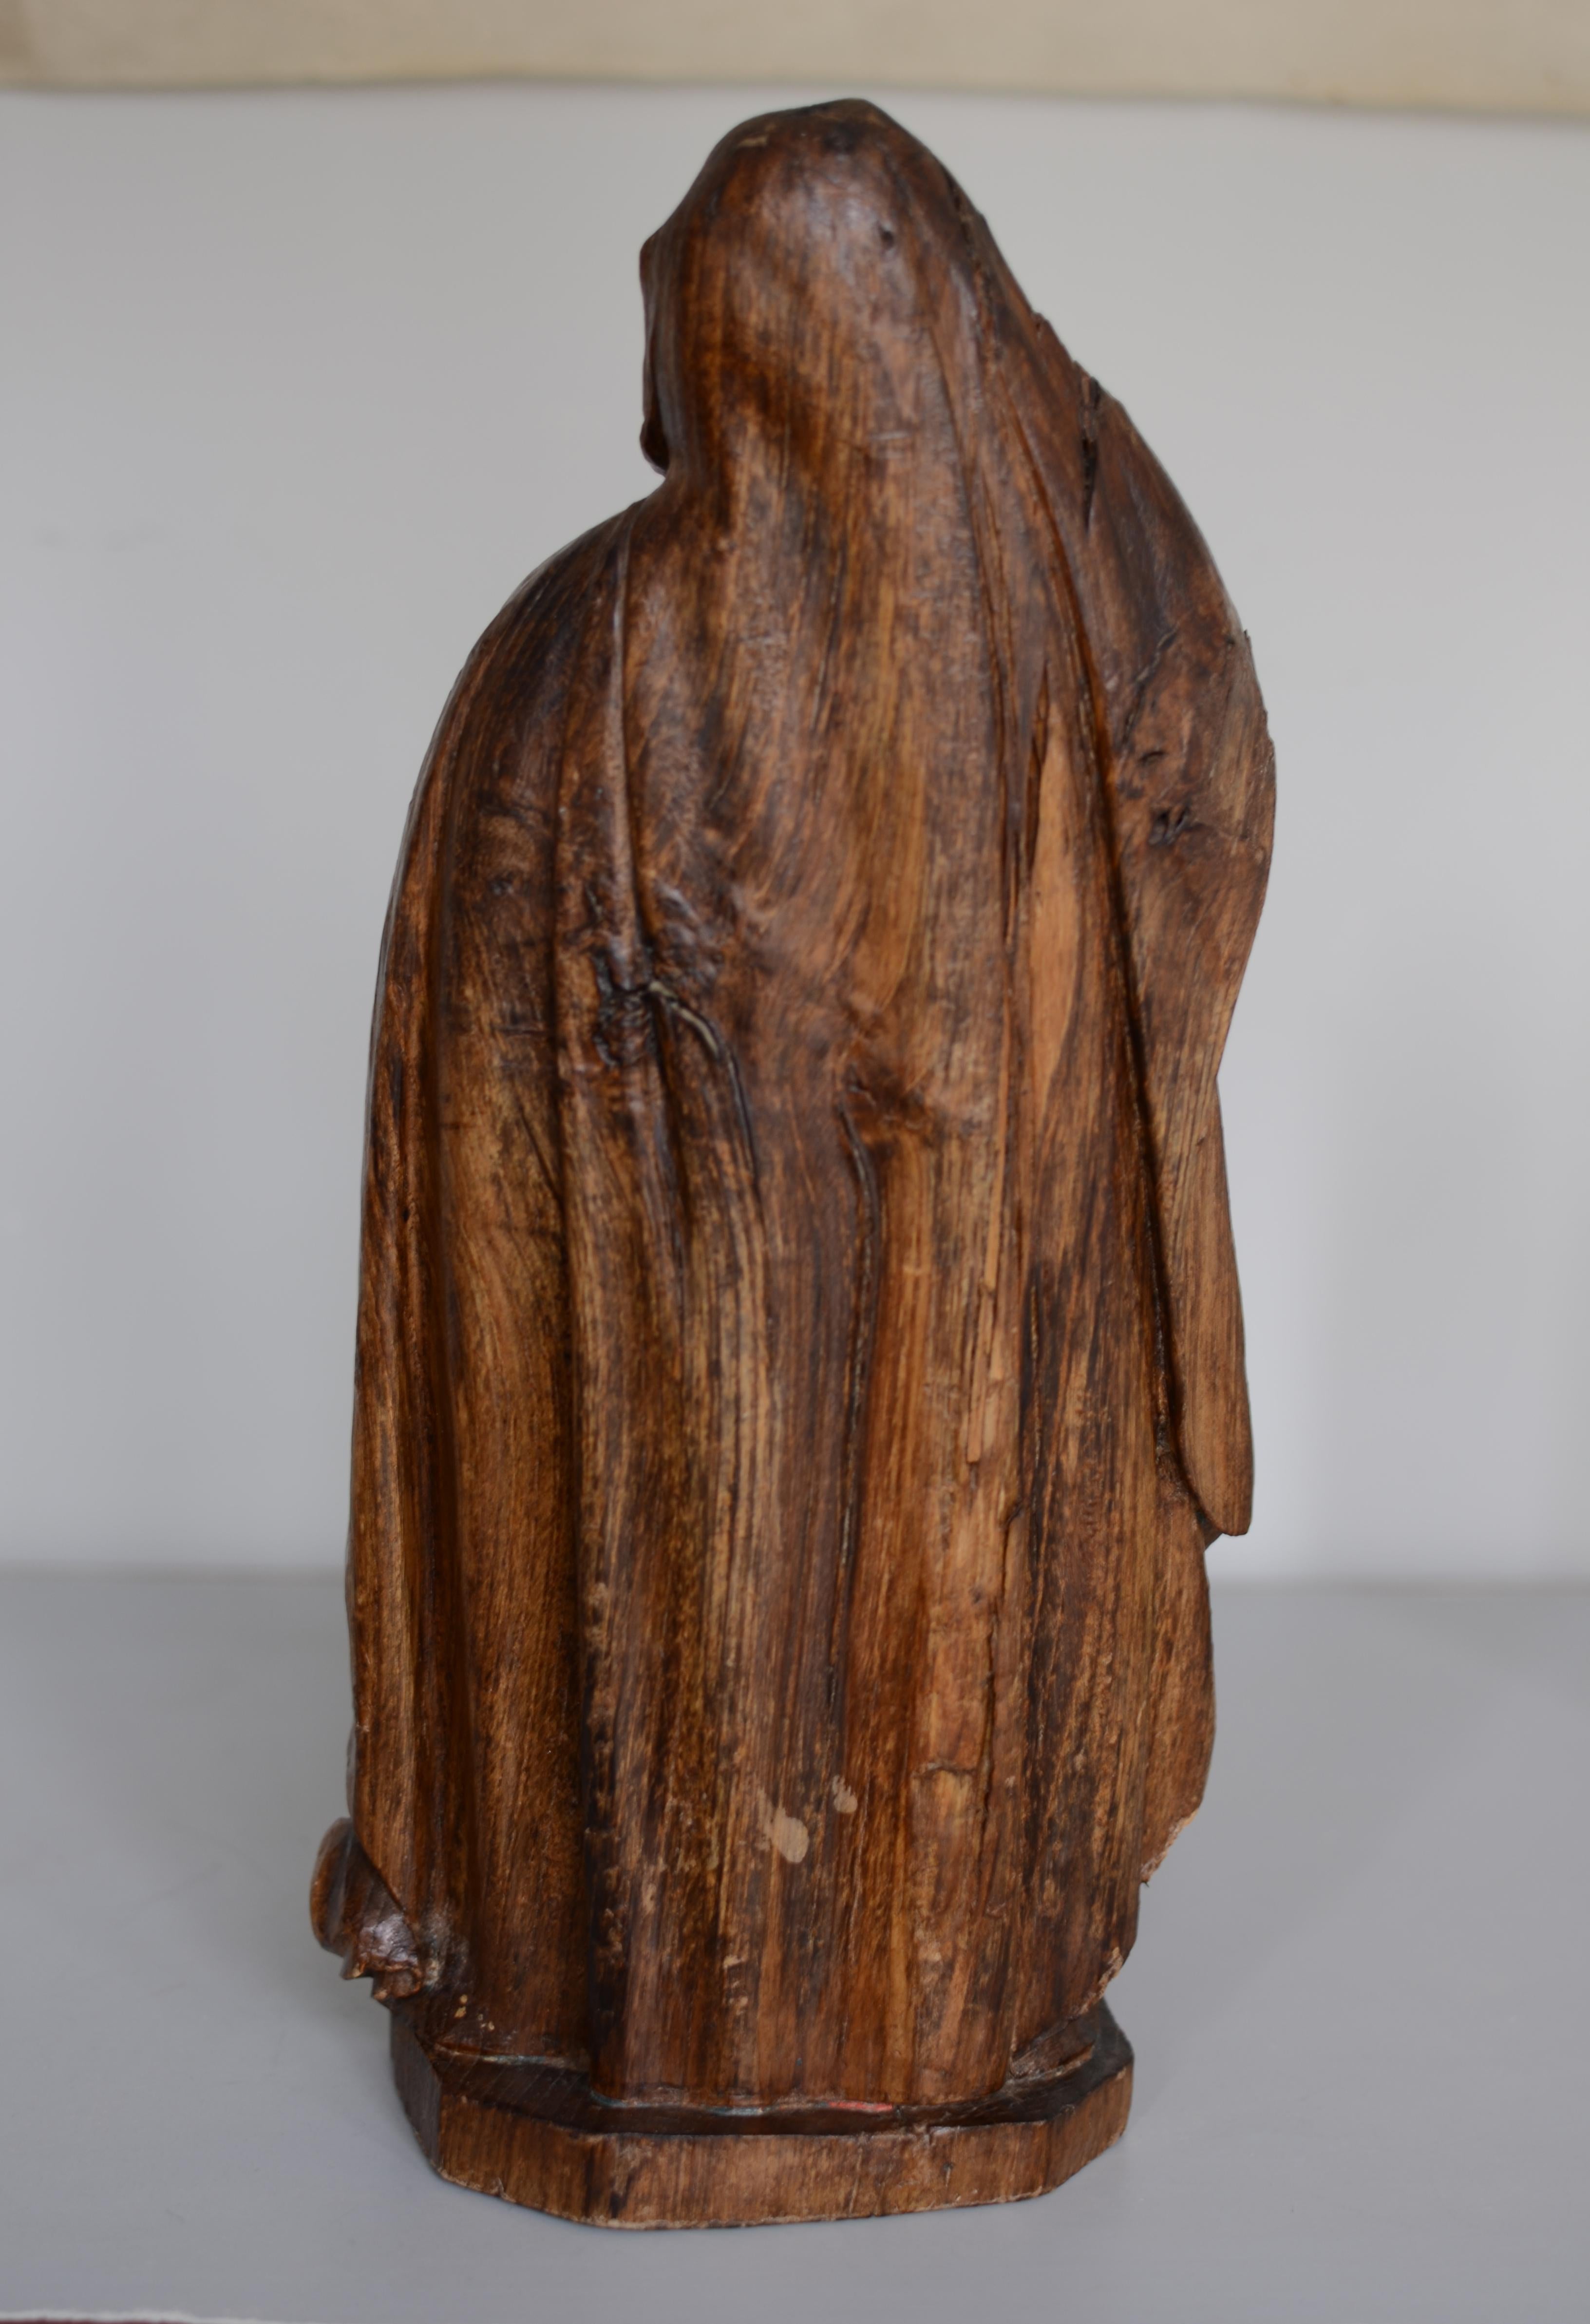 Carved 17th Century Flemish Oak Devotional Figure of the Mourning Virgin Mary